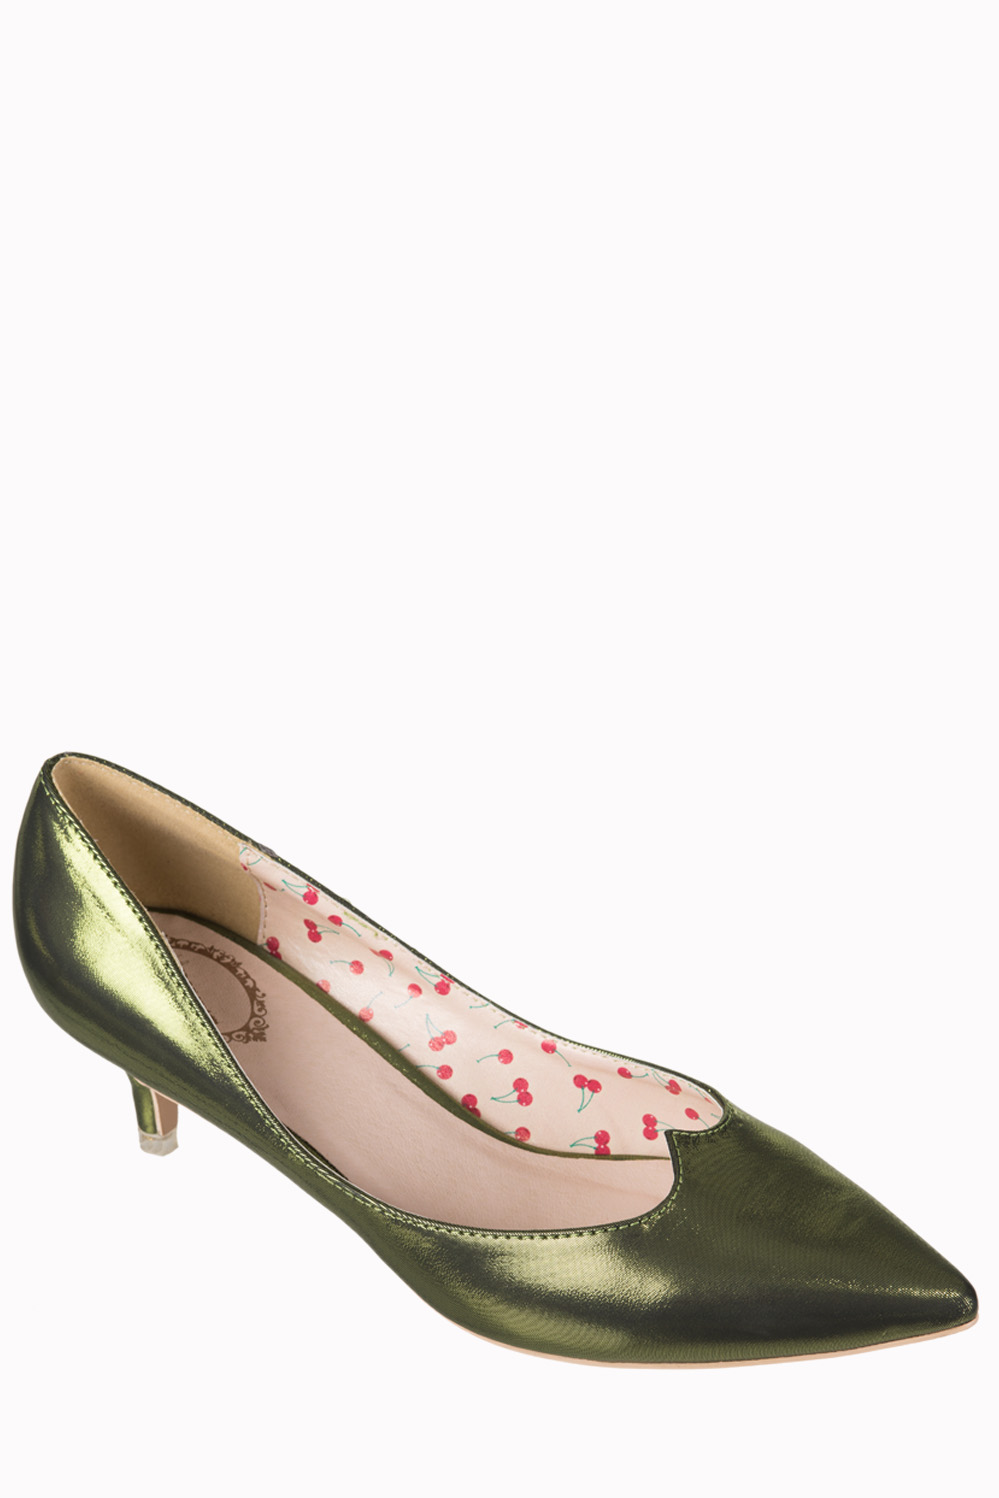 Dancing Days By Banned 1940s Olive Green Kitten Heels